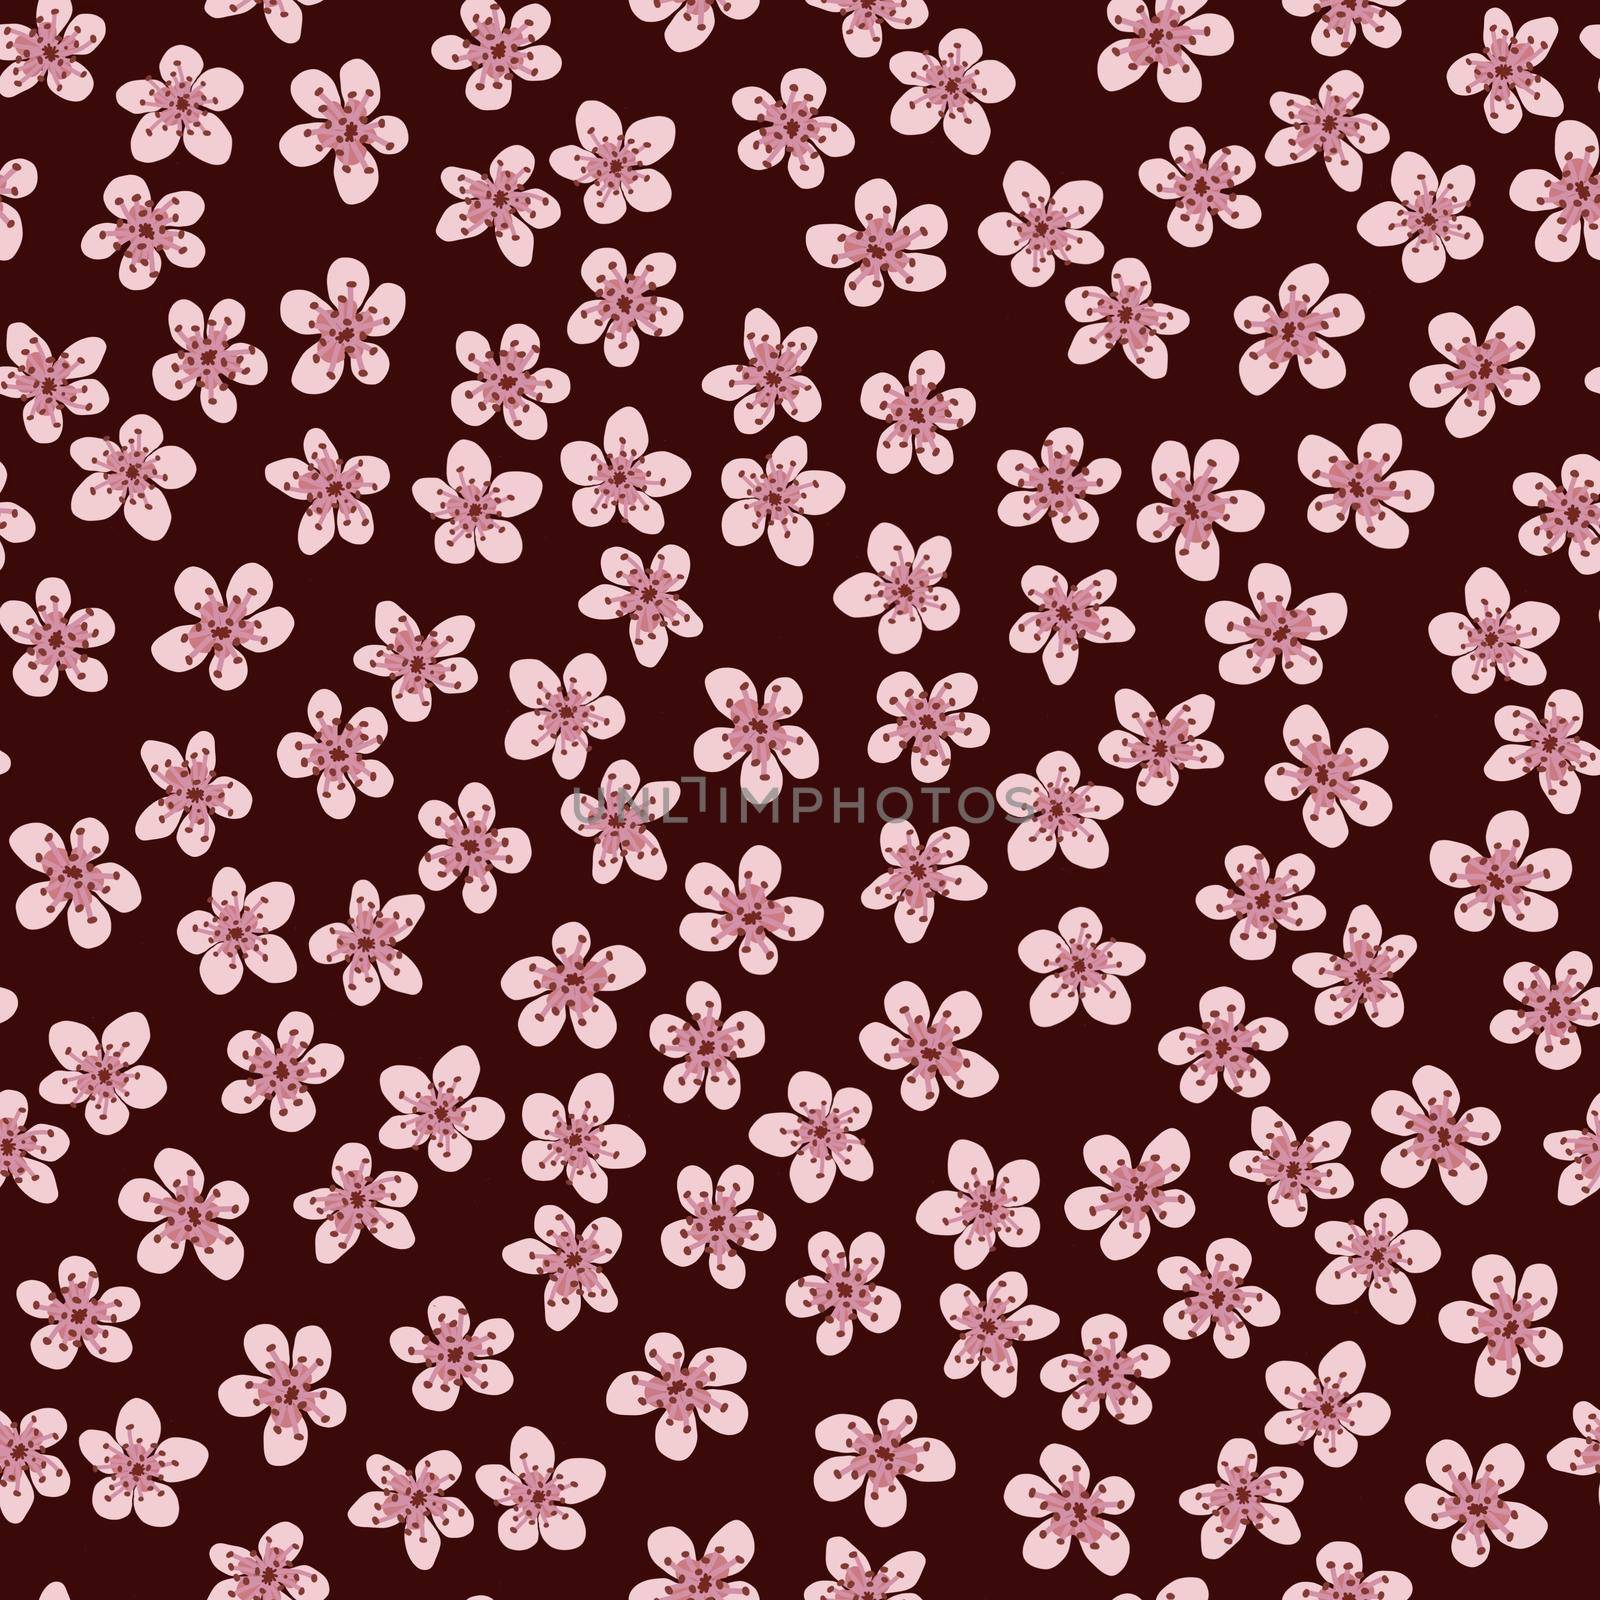 Seamless pattern with blossoming Japanese cherry sakura for fabric, packaging, wallpaper, textile decor, design, invitations, print, gift wrap, manufacturing. Pink flowers on burgundy background. by Angelsmoon